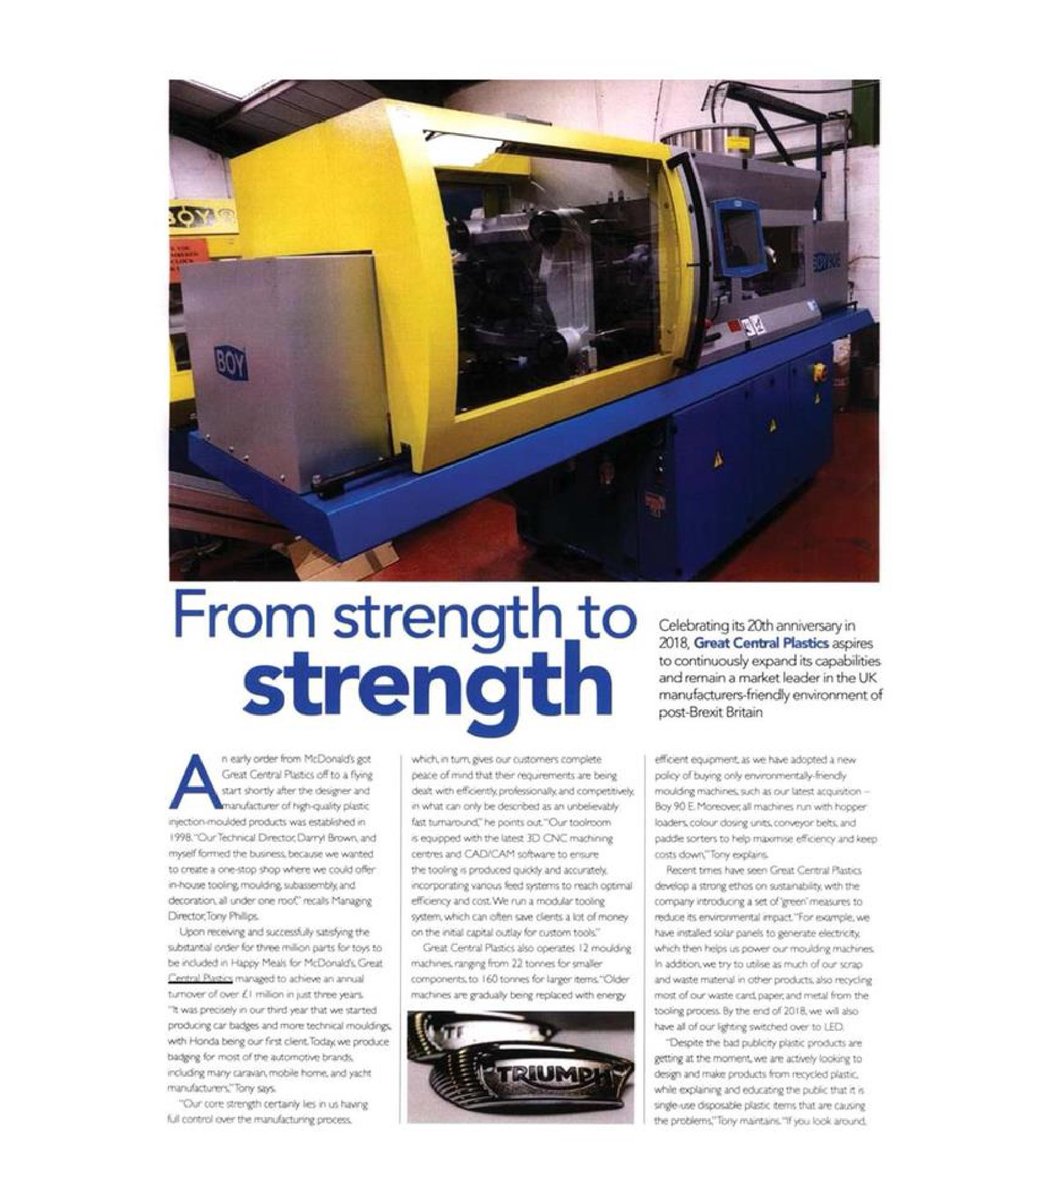 Great to see our #sustainability, #contractwins and #machinery mentioned in an exclusive feature in @MTE_magazine